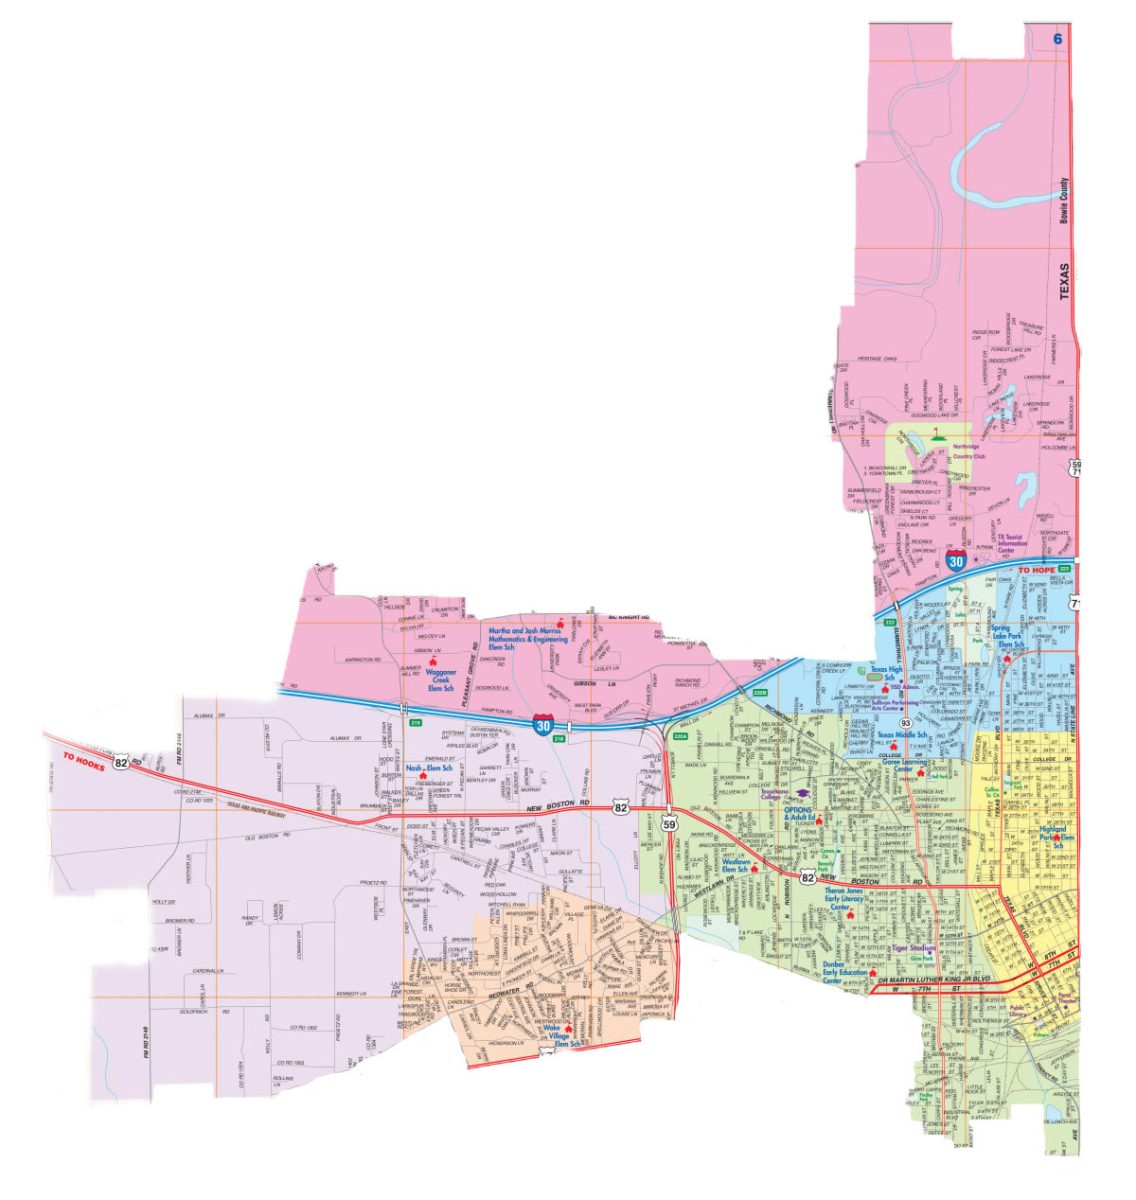 Figure B.
The TISD district spreads throughout the majority of Texarkana and occupies an area in all of TTPDs six beats. Other districts in Texarkana, Texas do not cover as much land.